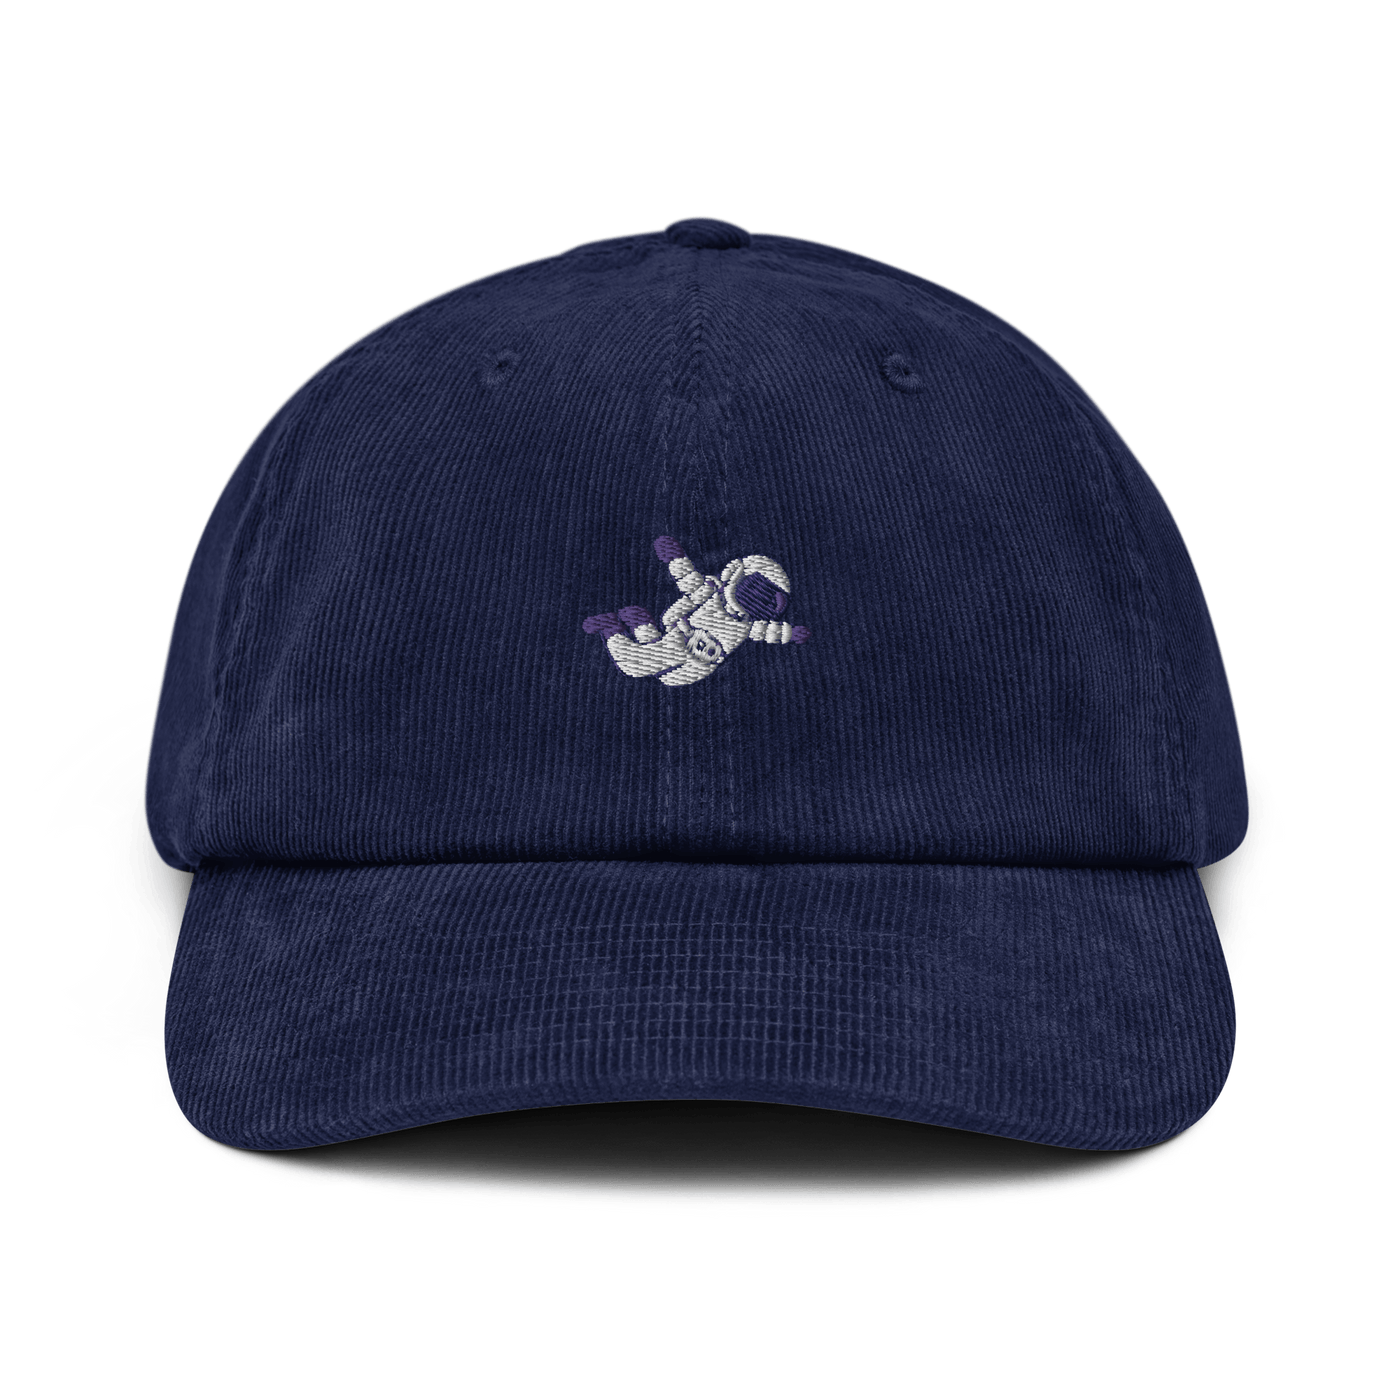 Astronaut Corduroy hat - Oxford Navy - - Just Another Cap Store